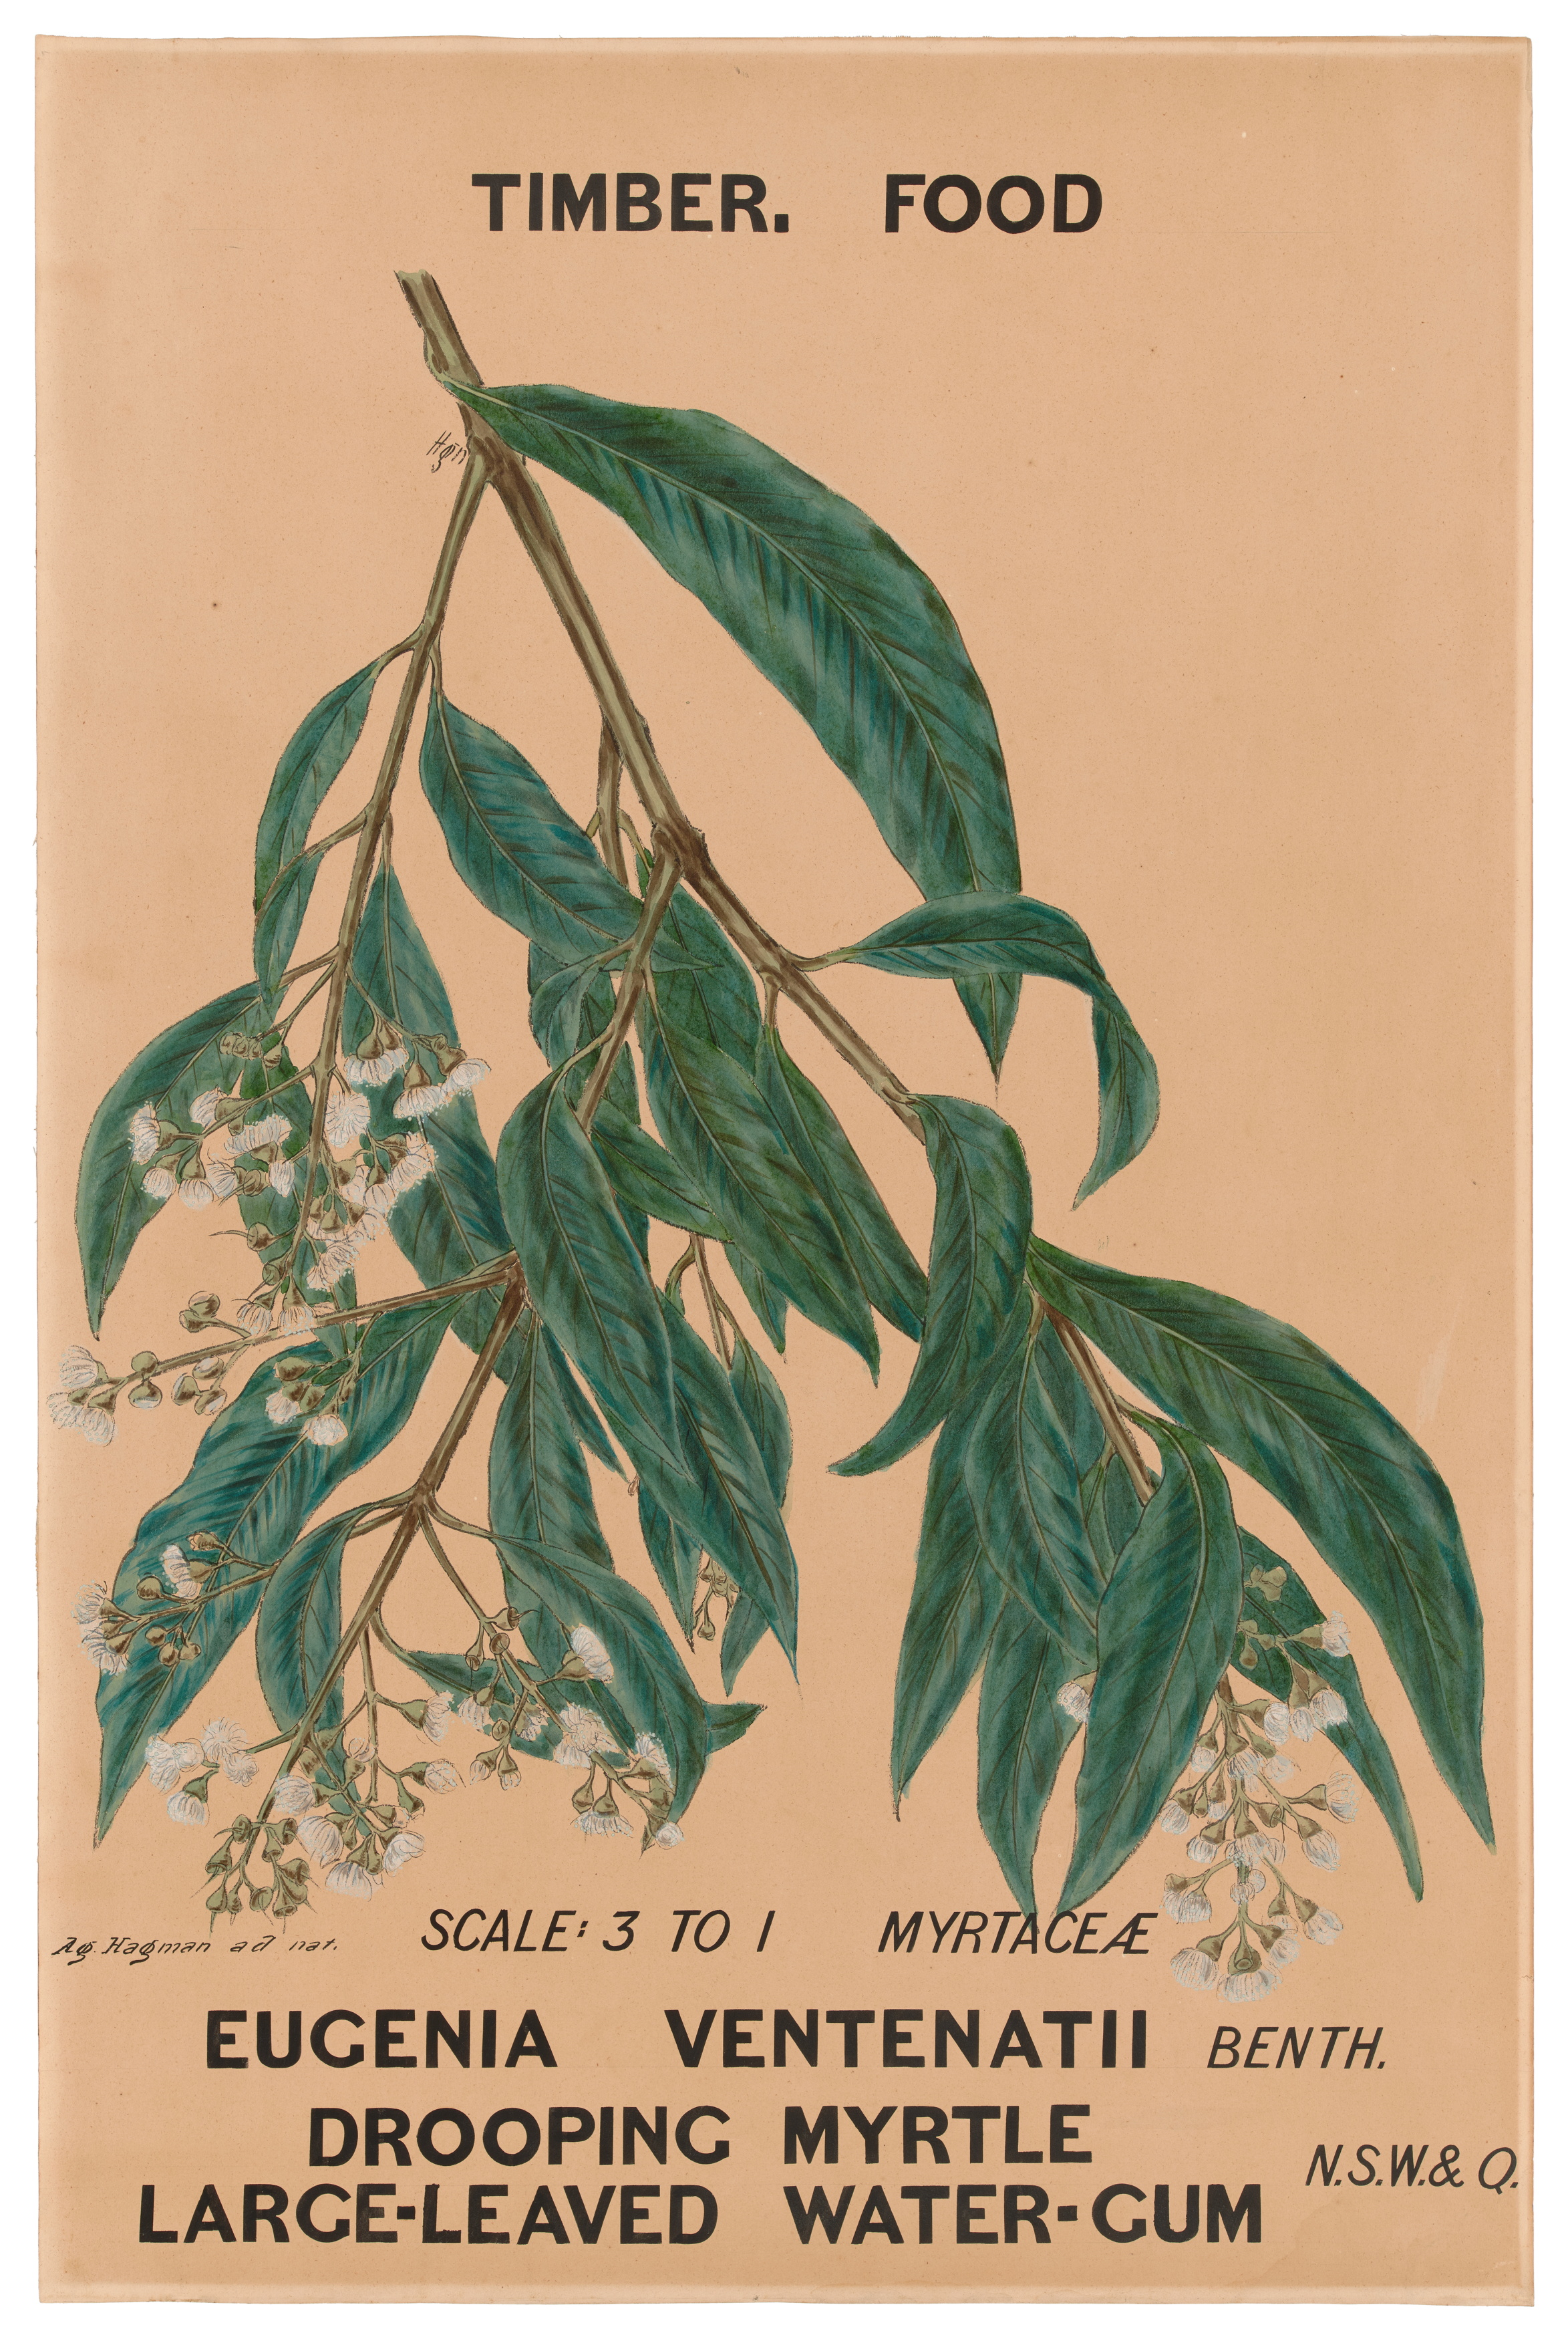 Botanical illustration of 'Eugenia ventenatii (Large leaved water gum / Drooping Myrtle)' by Agard Hagman